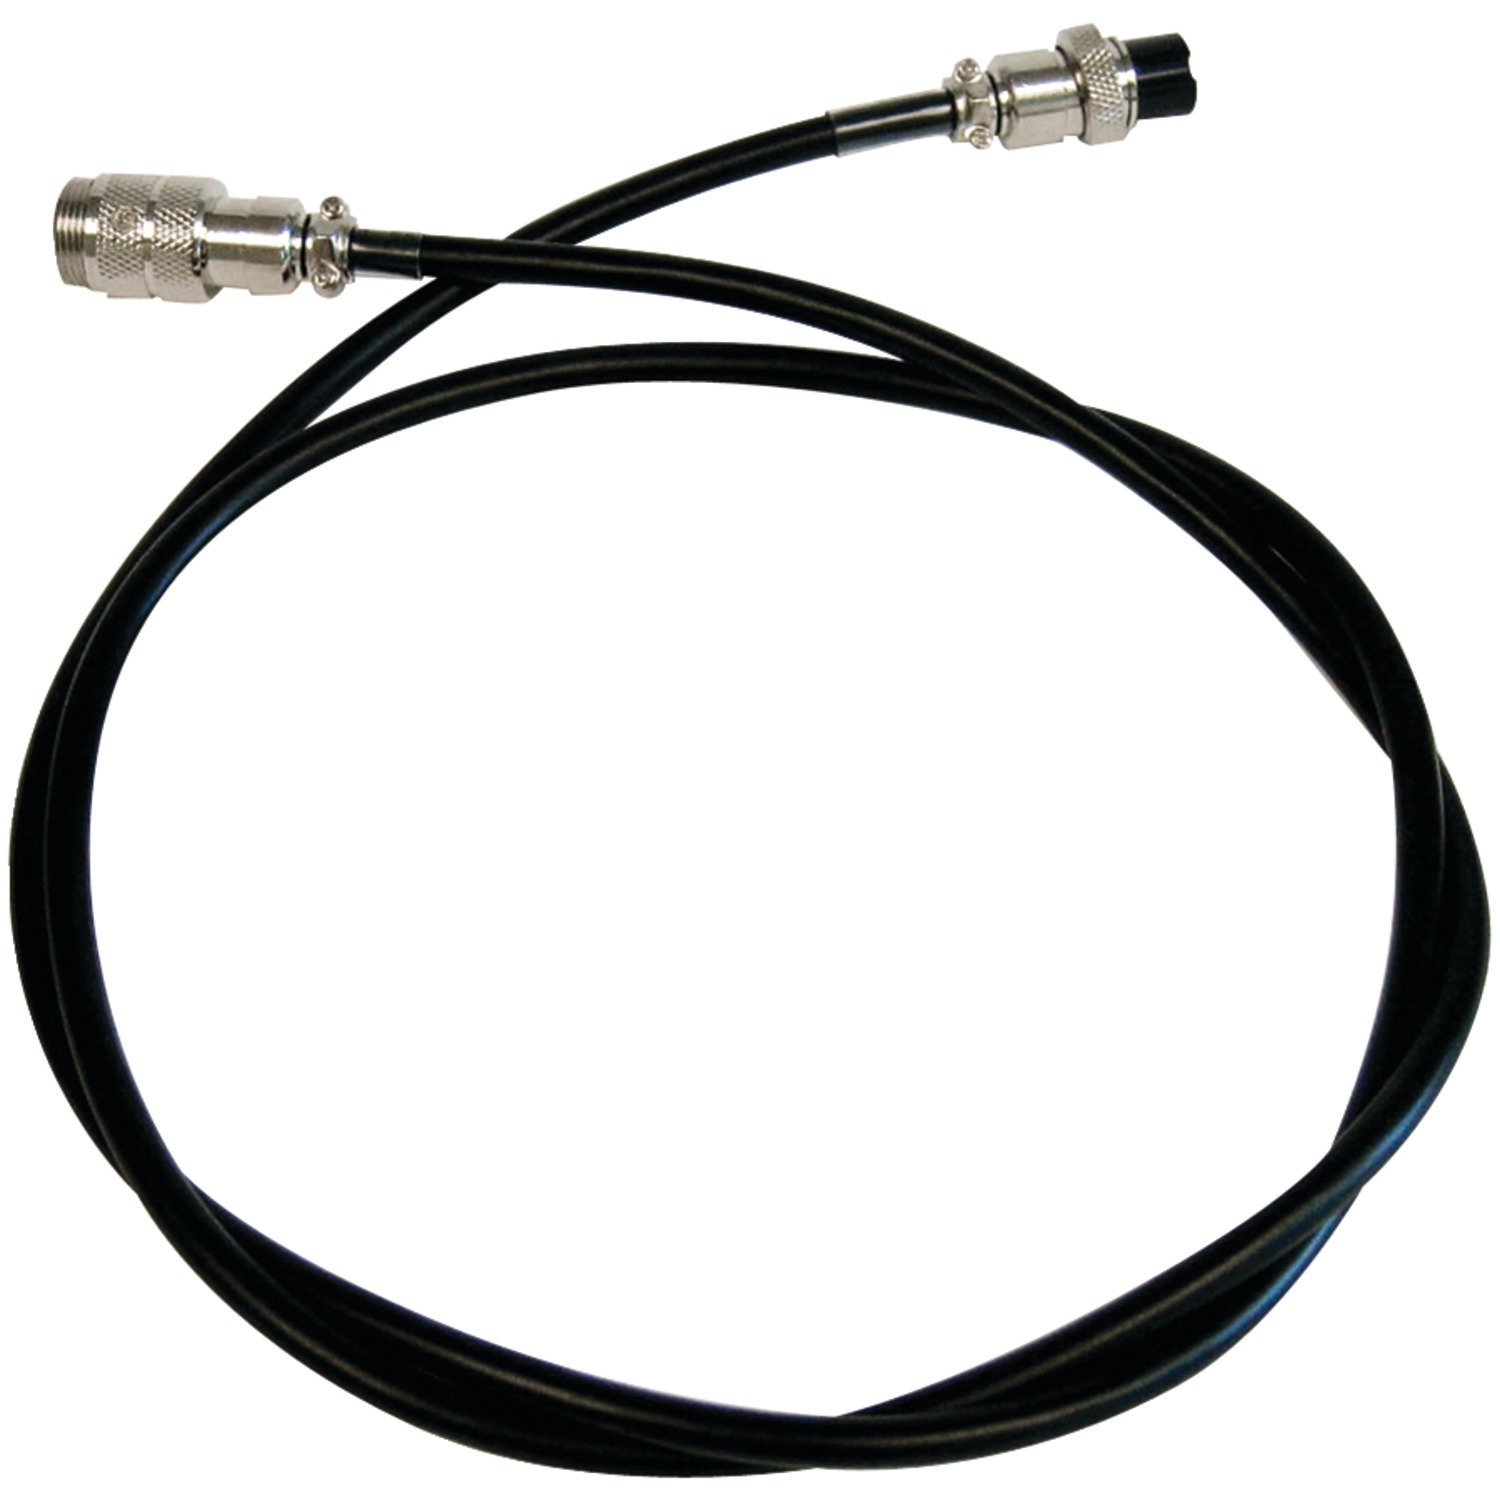 Cobra AC 702 4-foot Microphone Extension Cable